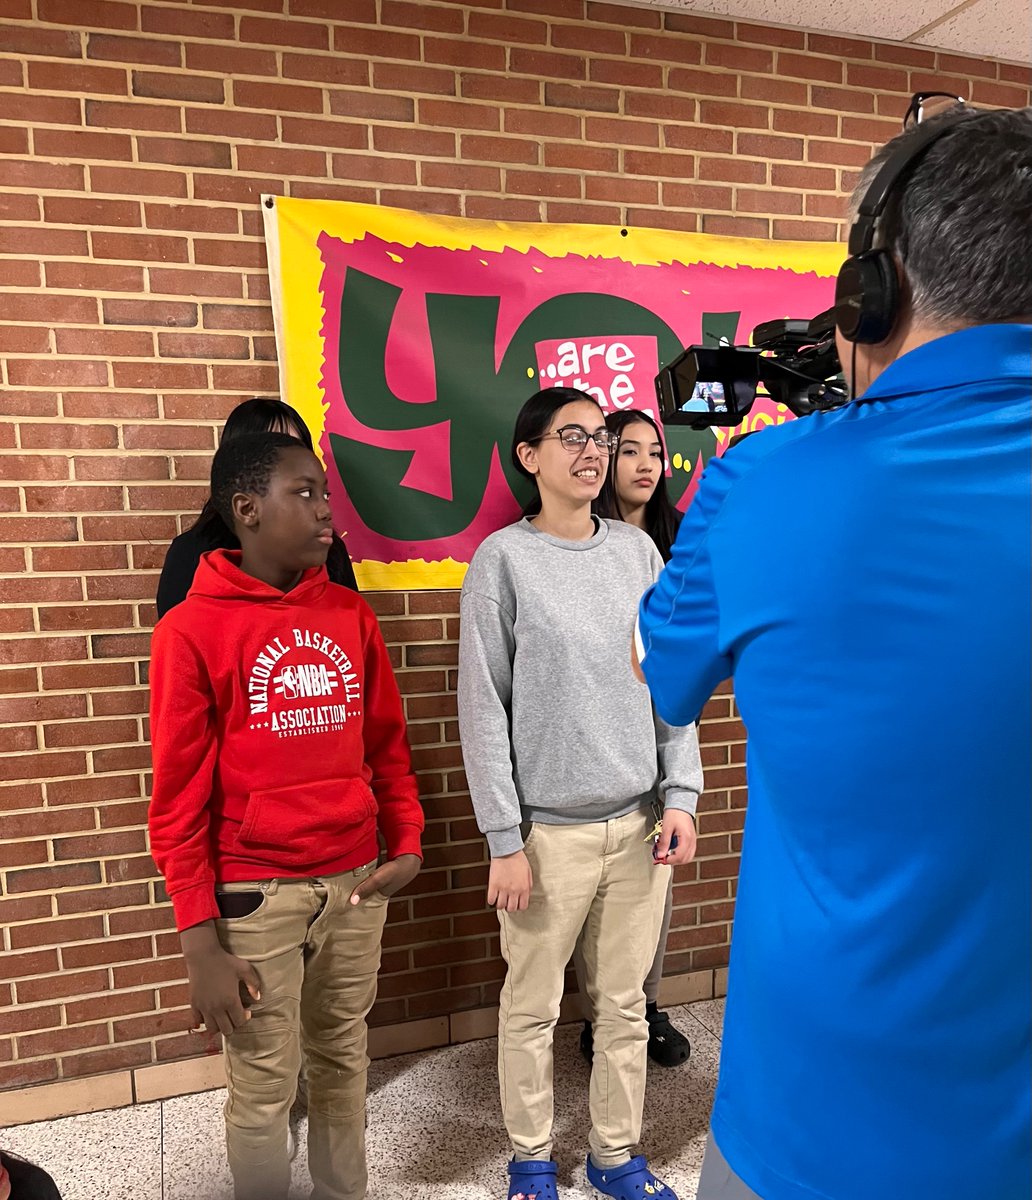 Today we went off to Eisenhower Middle School in Laurel to film more for the @pgcps English Language Development (ELD) program, formerly known as ESOL. These kids are naturals in front of the camera and it's great to work with them! @PGCPSELD @ELDSupervisor @tejalkpatel